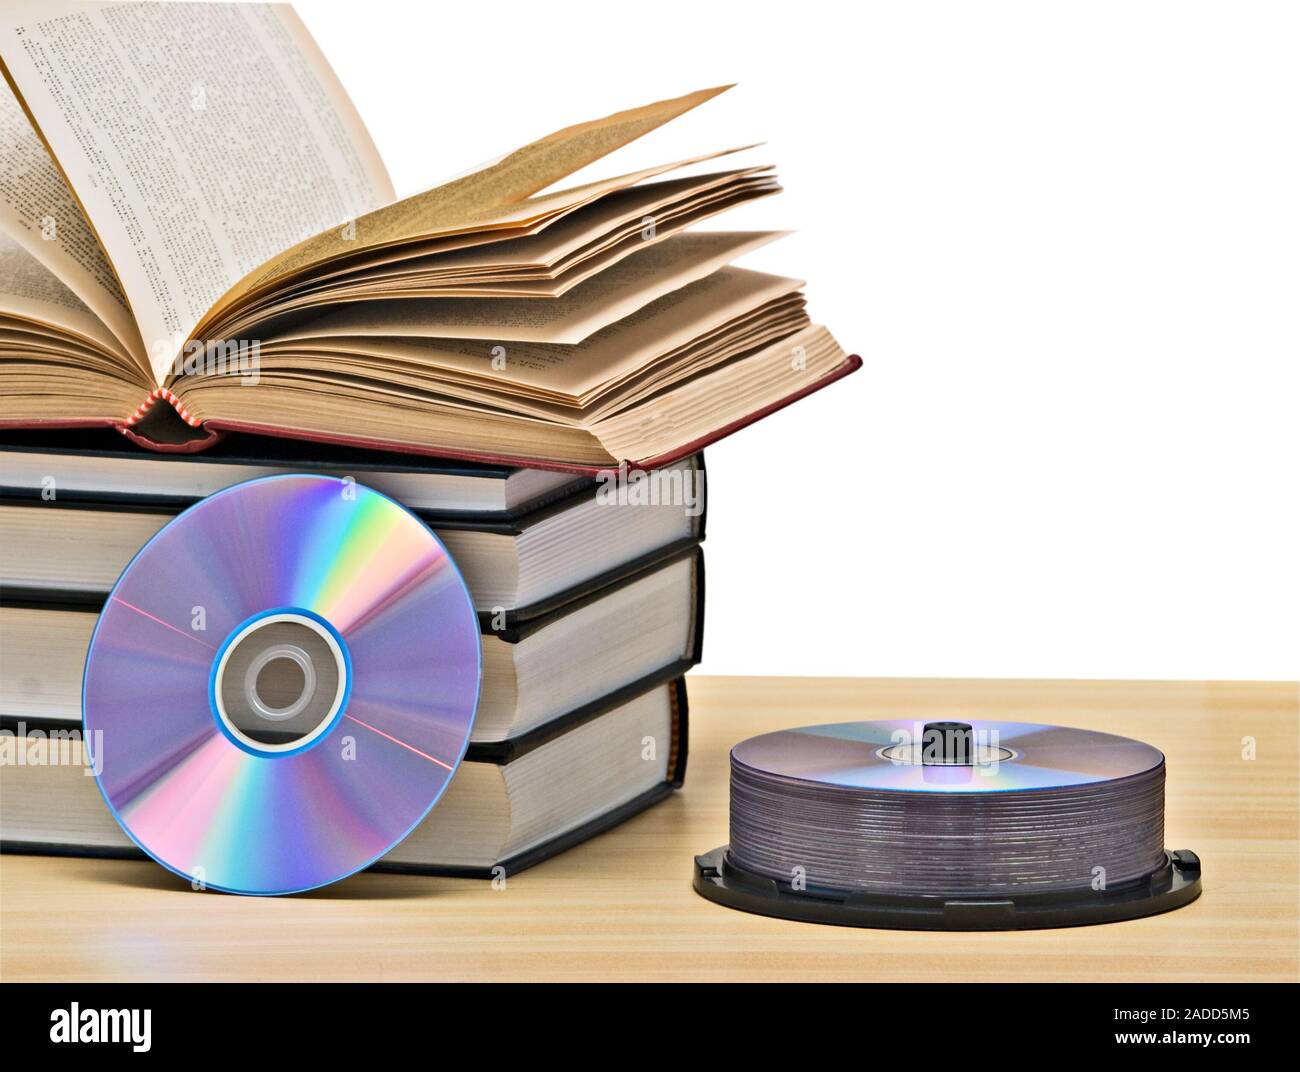 Pile of books  and DVD disk as symbols of old and new methods of information storage Stock Photo